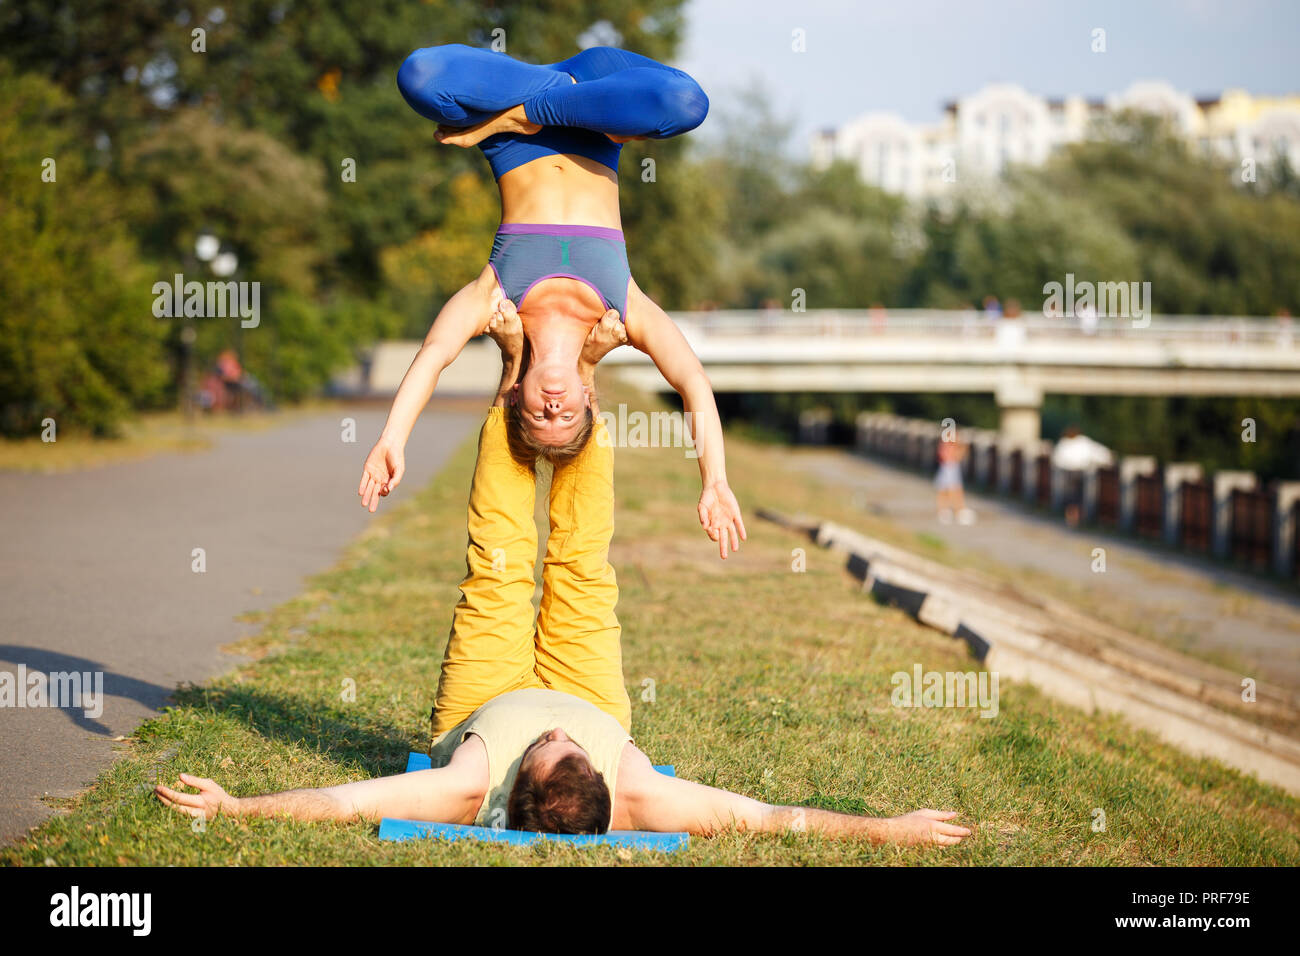 Couple of young man and woman practicing acro yoga in city park Stock Photo